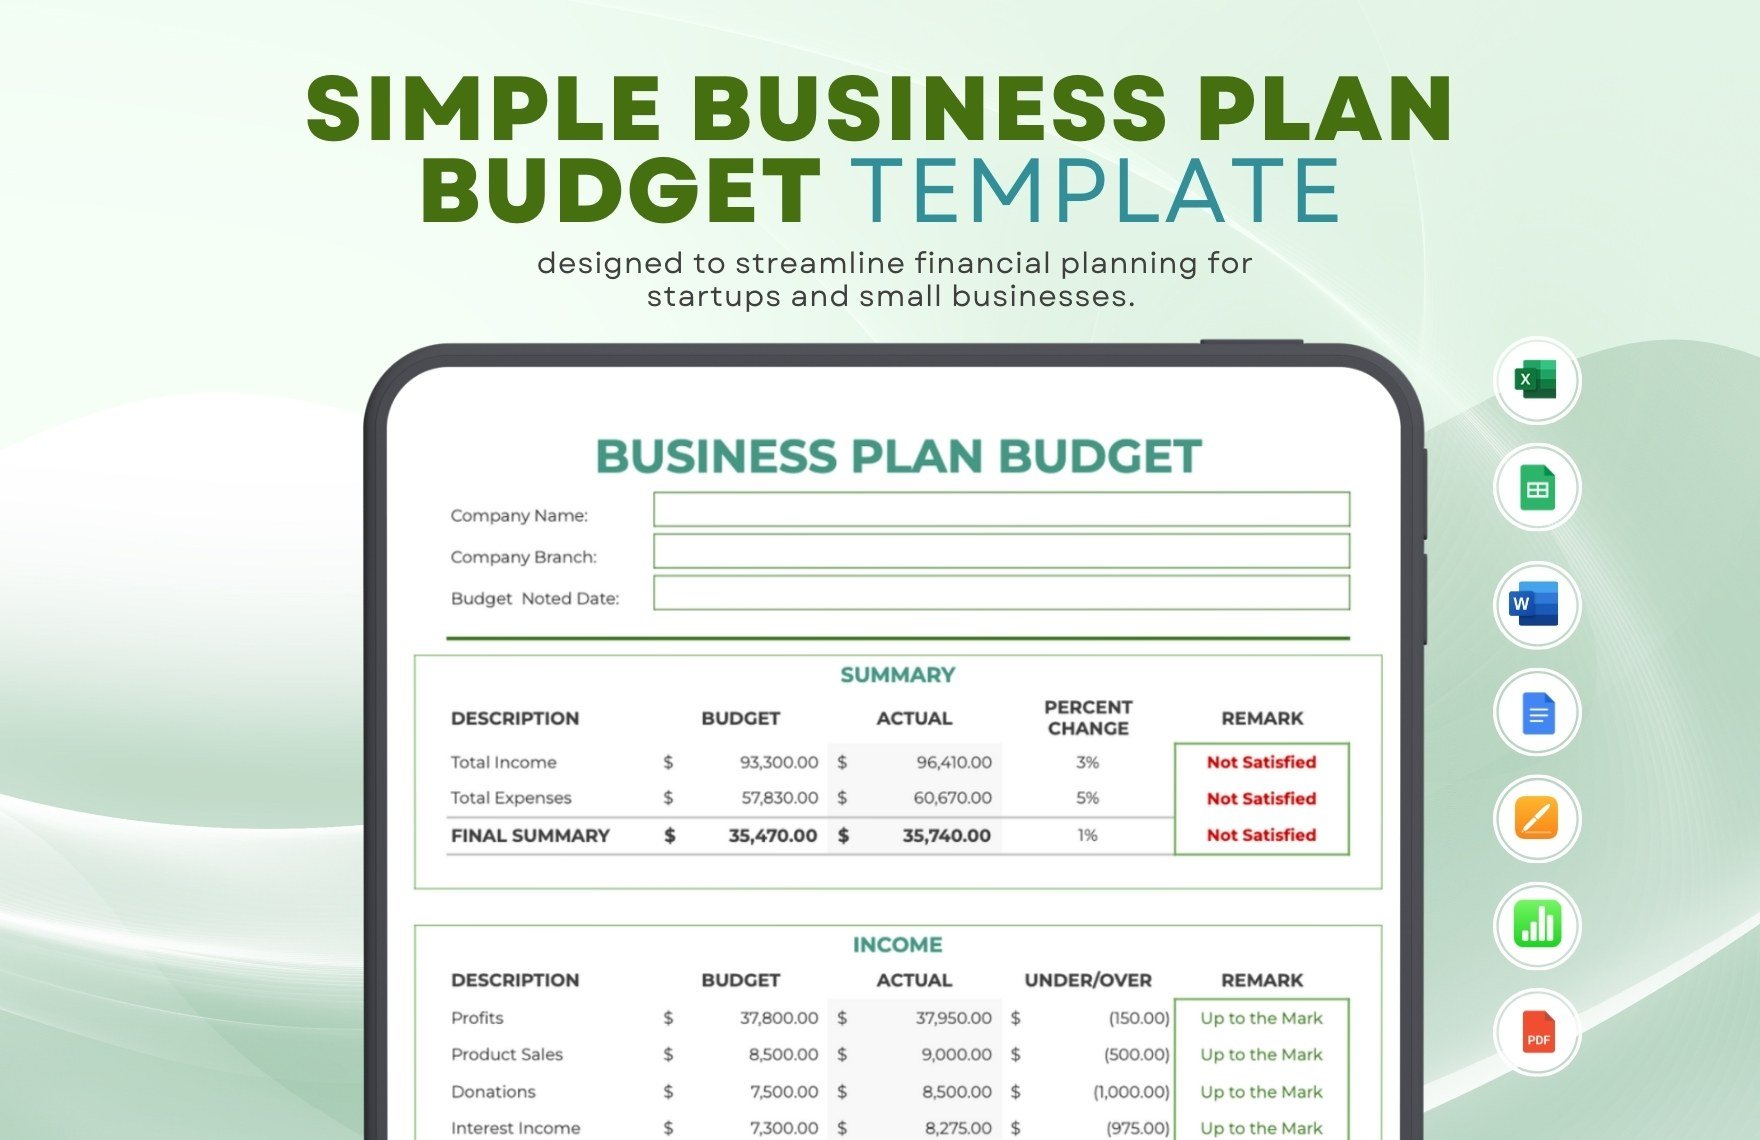 Free Simple Business Plan Budget Template in Word, Google Docs, Excel, PDF, Google Sheets, Apple Pages, Apple Numbers